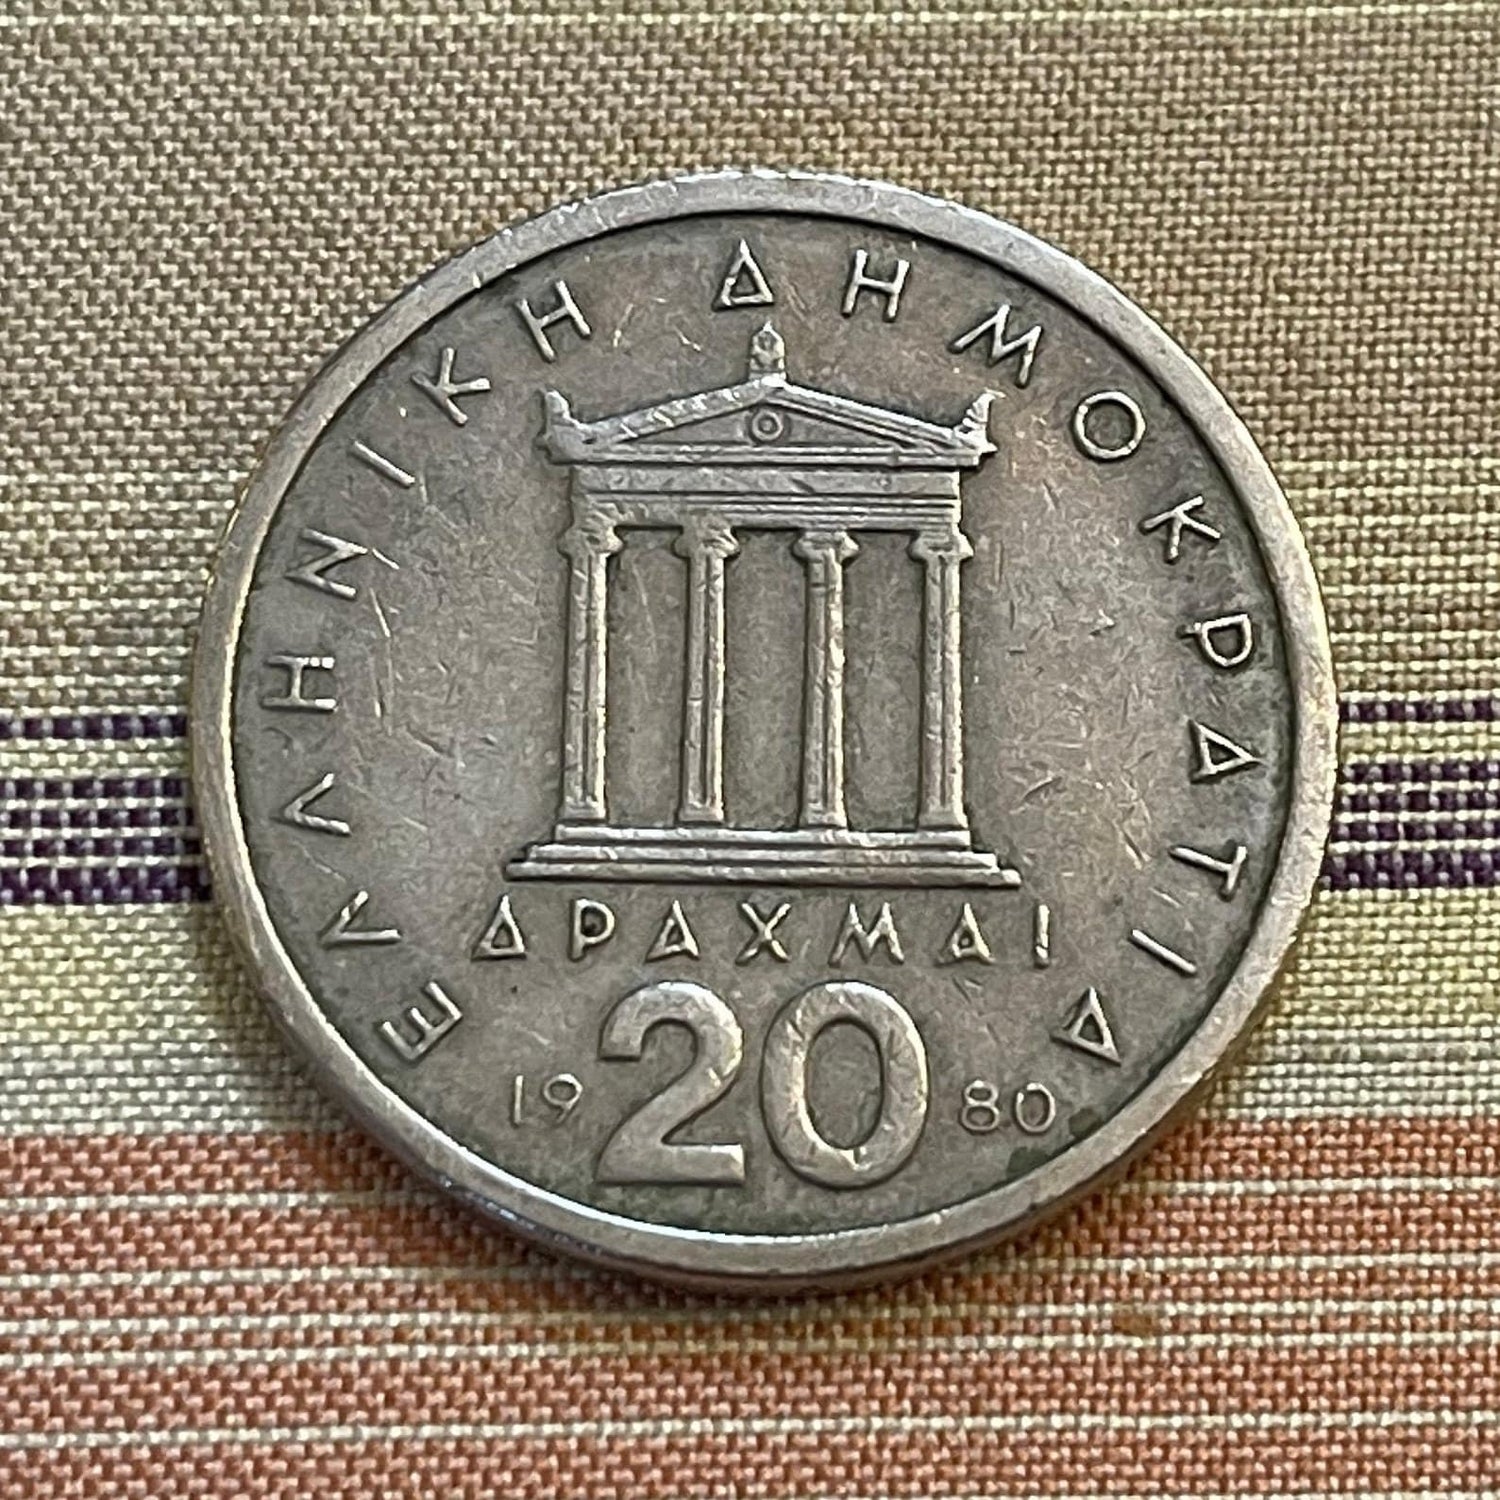 Parthenon & Pericles 20 Drachmai Greece Authentic Coin Money for Jewelry and Craft Making (Temple of Athena)